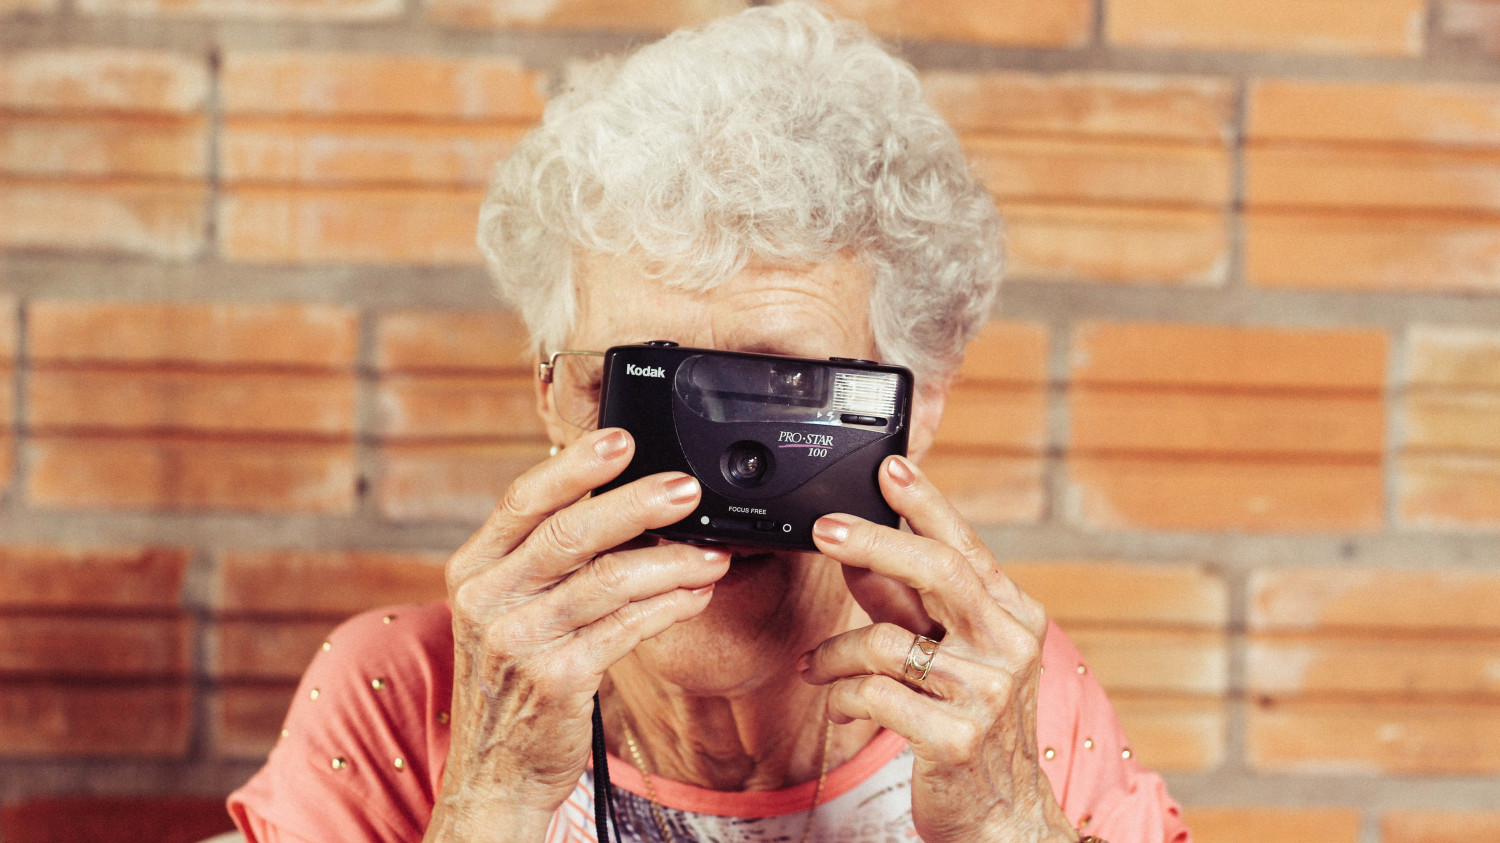 Image of an elderly woman with a camera held up to her face taking a photo